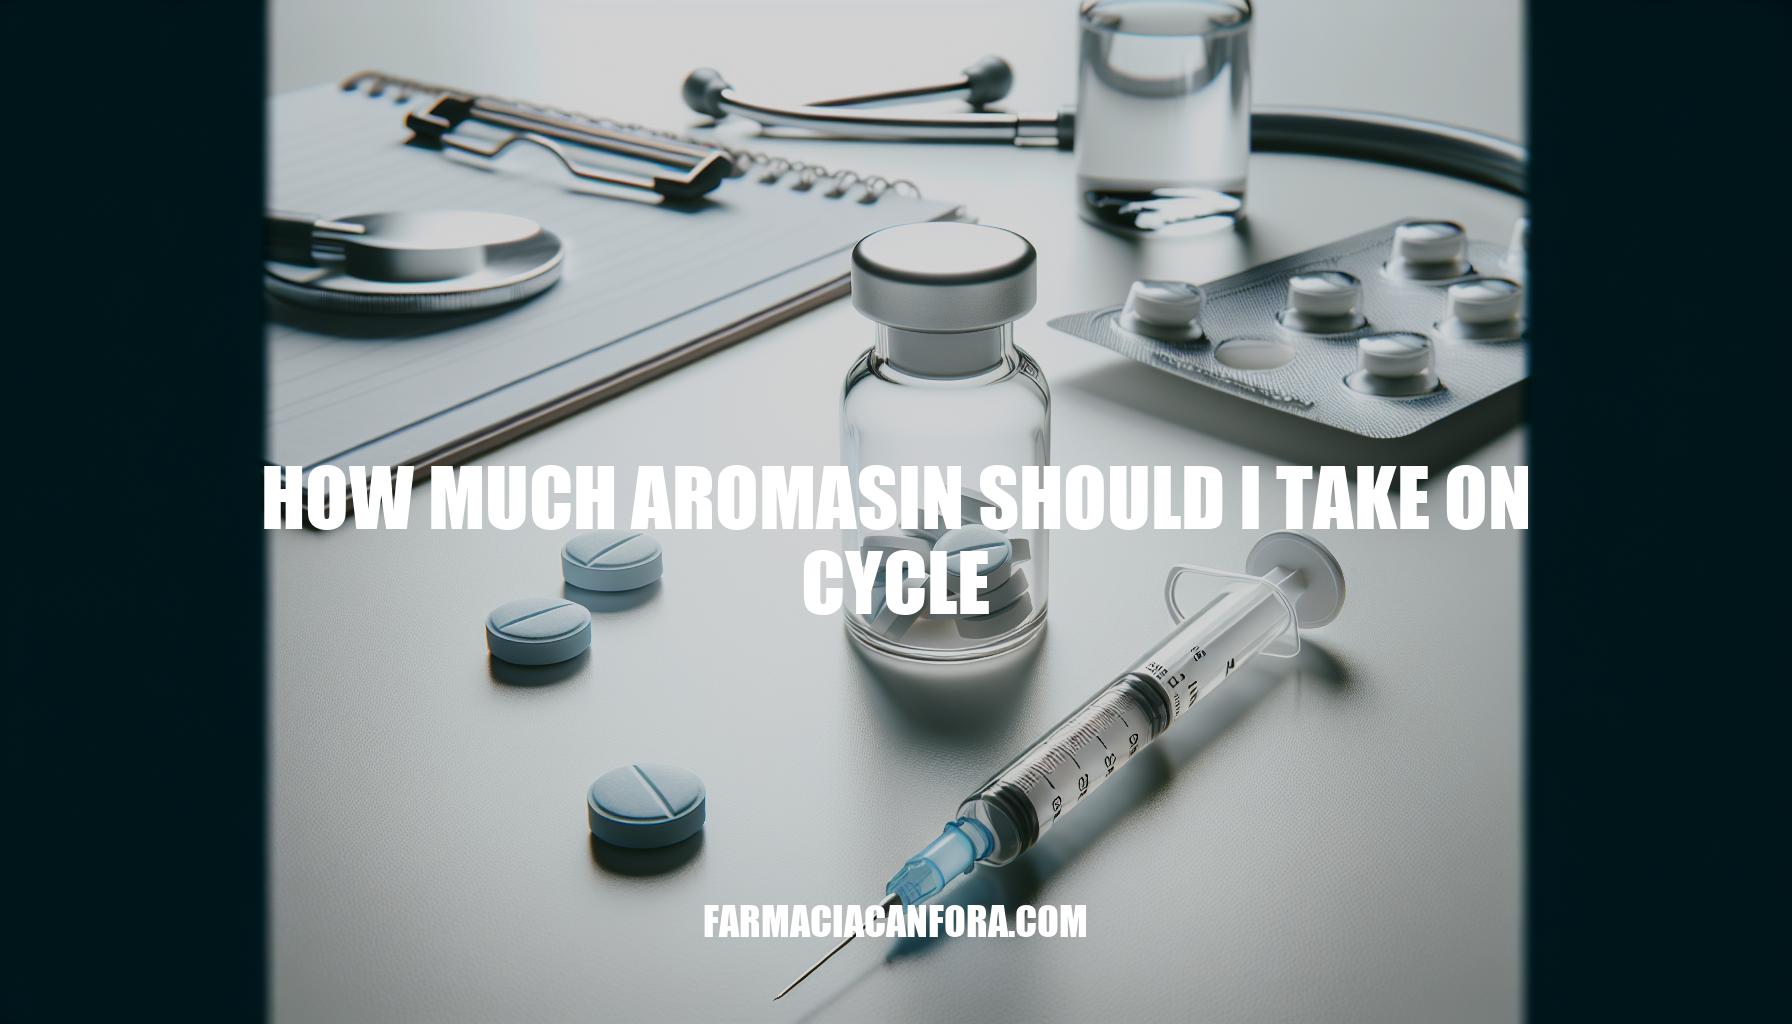 How Much Aromasin Should I Take on Cycle